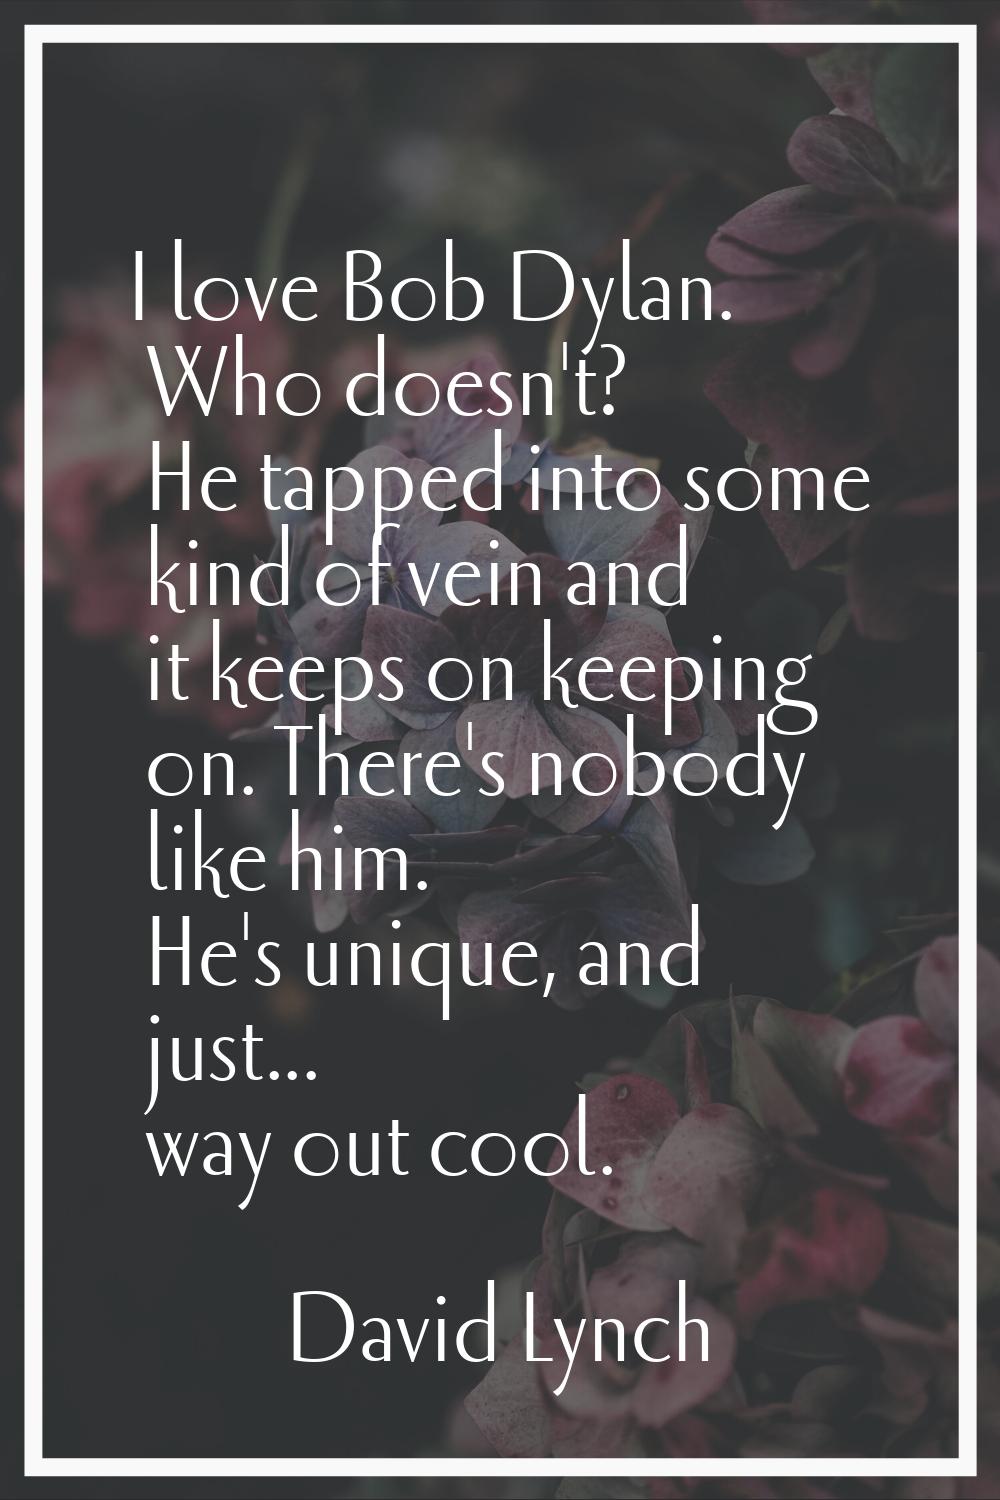 I love Bob Dylan. Who doesn't? He tapped into some kind of vein and it keeps on keeping on. There's